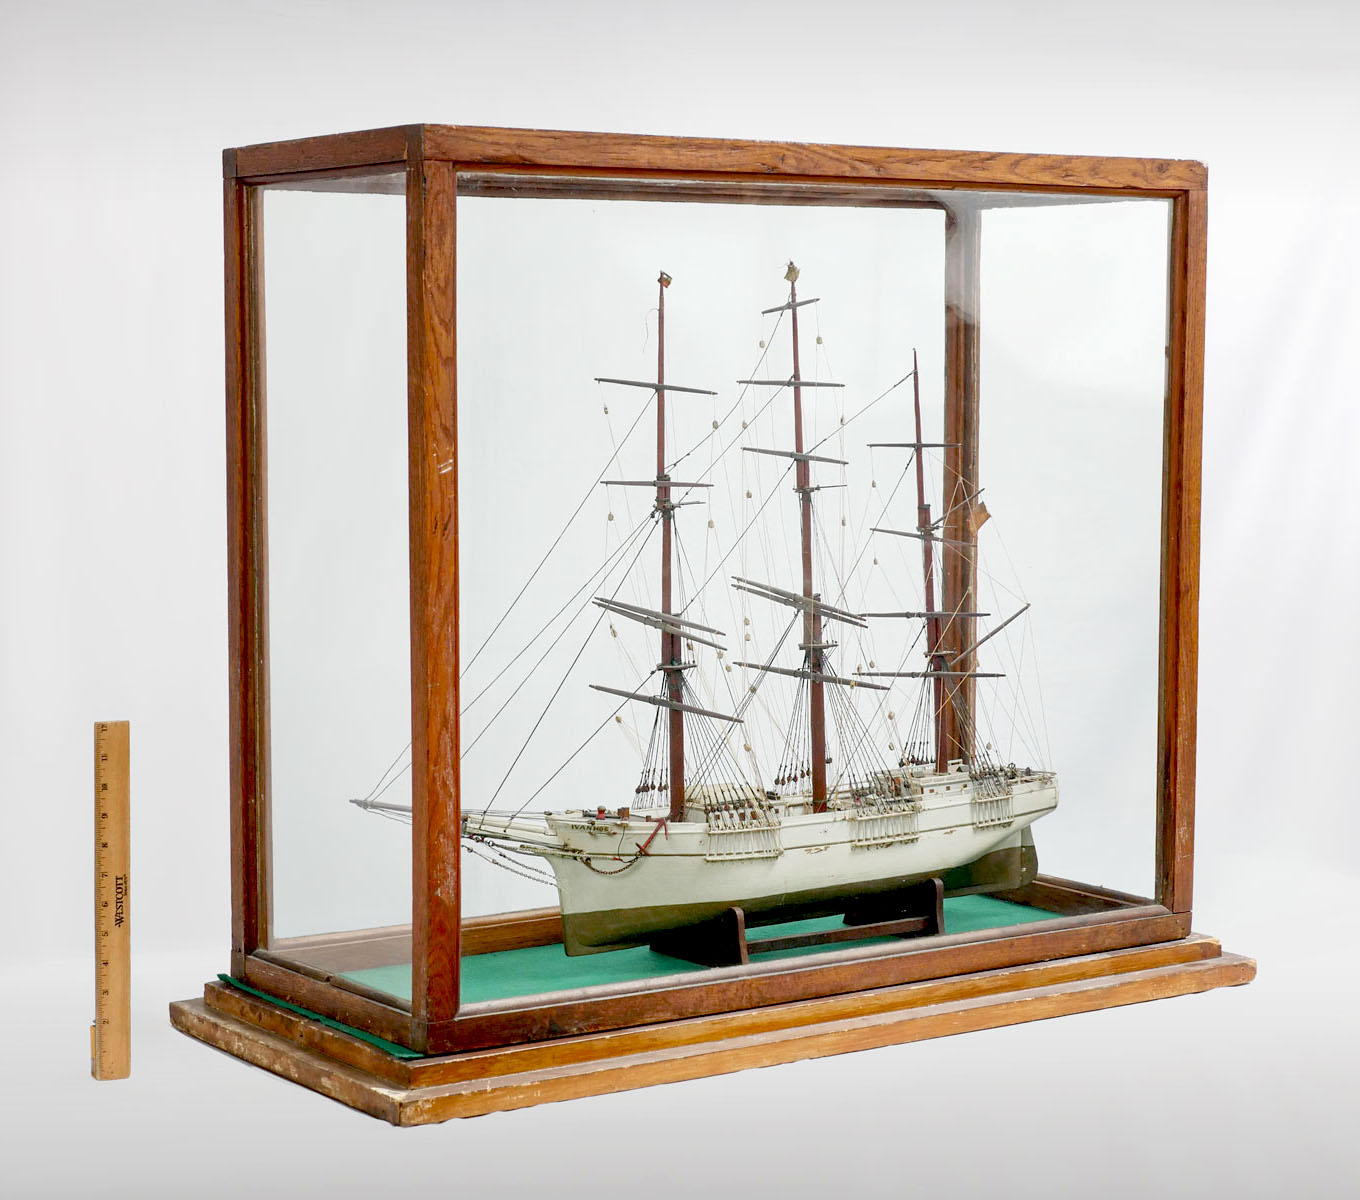 1890 S HANDCRAFTED SHIPS MODEL 36d32b